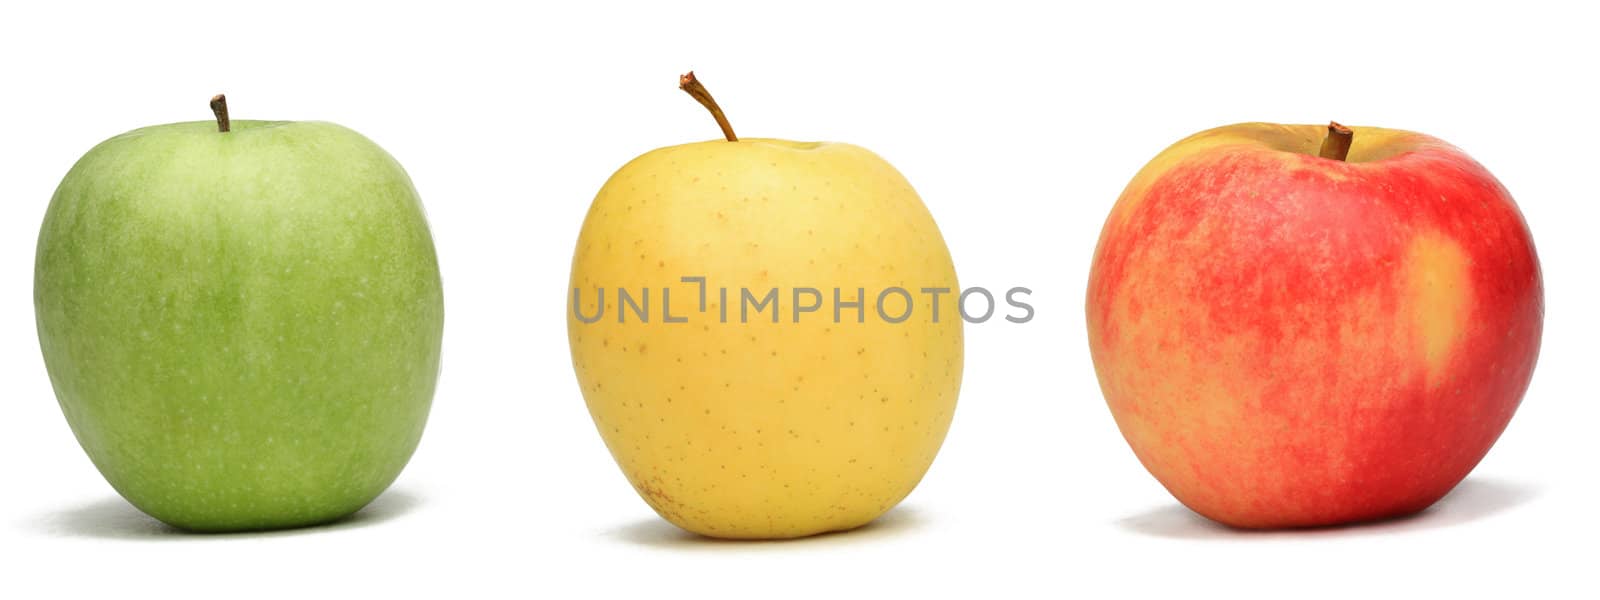 Image of three apples against a white background.